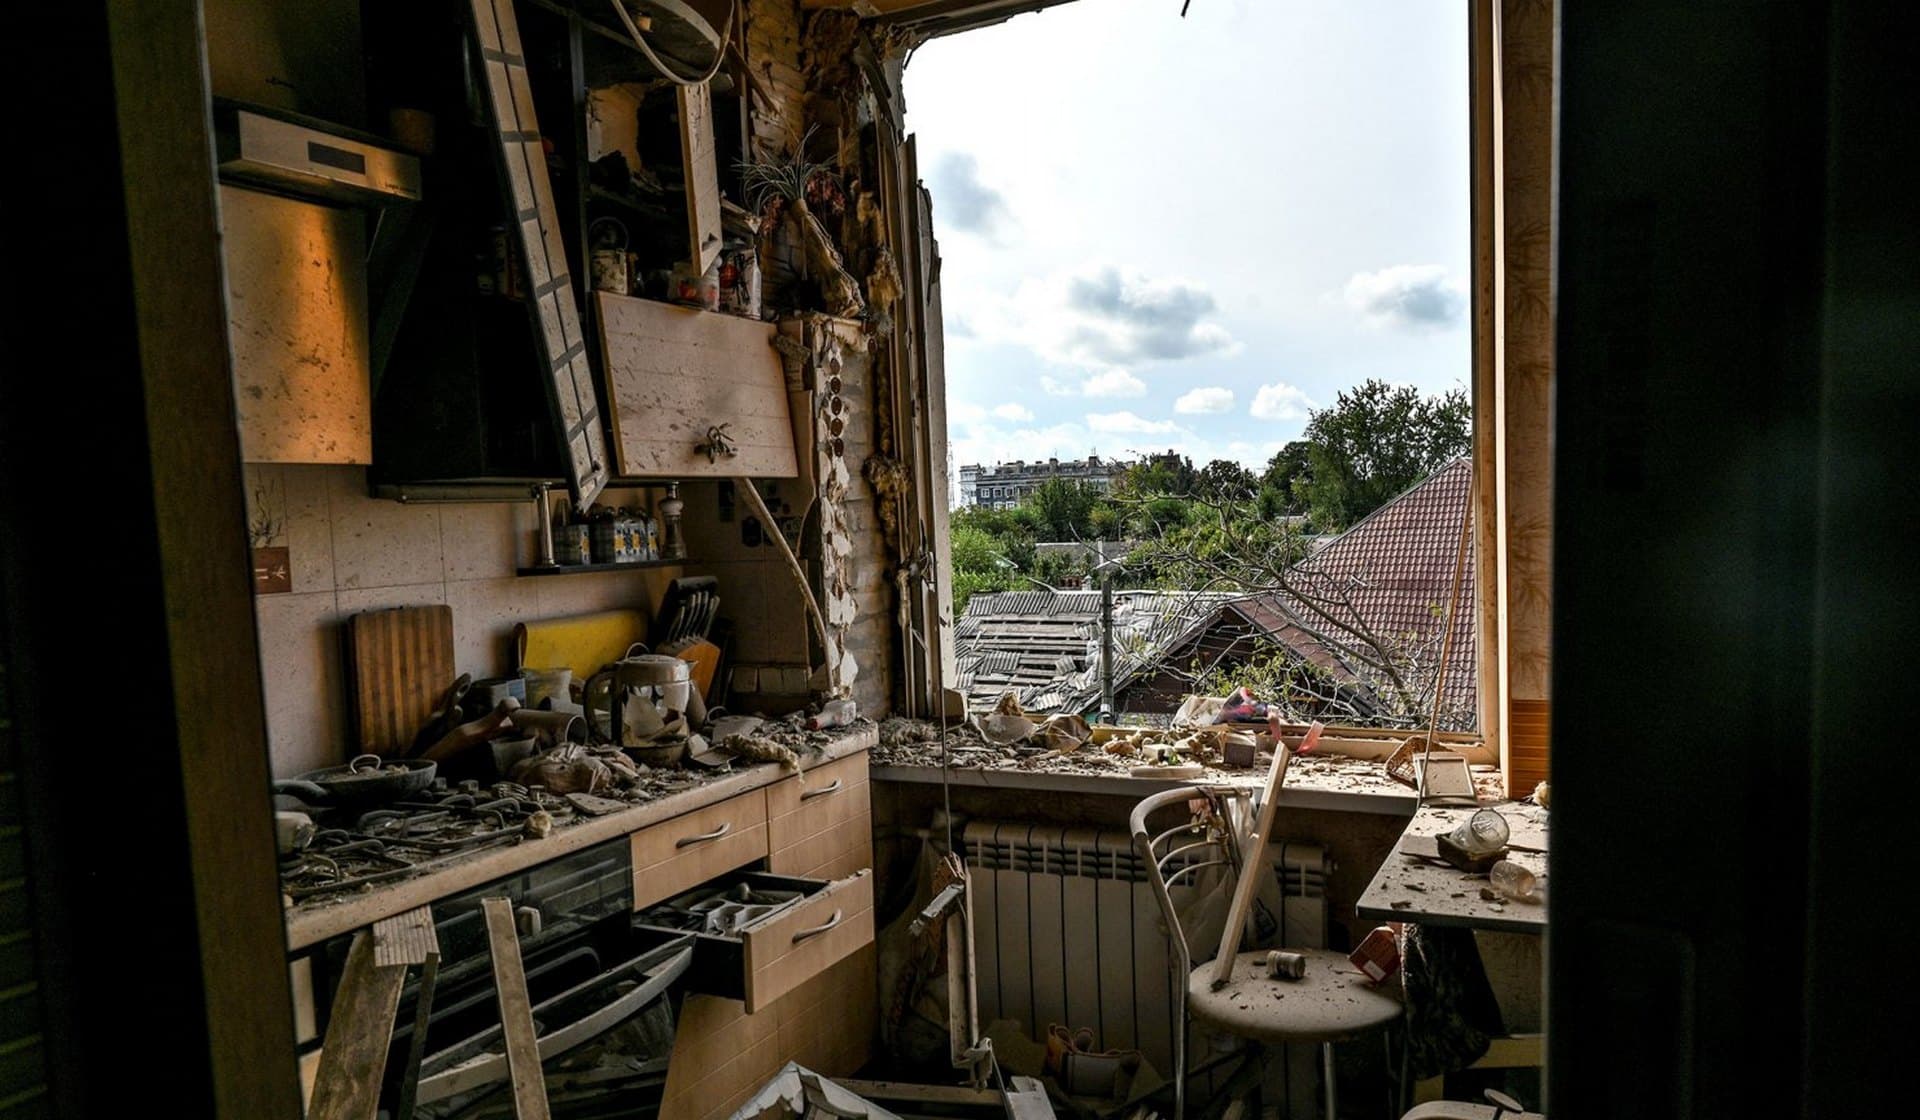 A kitchen of a residential building damaged by a Russian missile strike in Zaporizhzhia